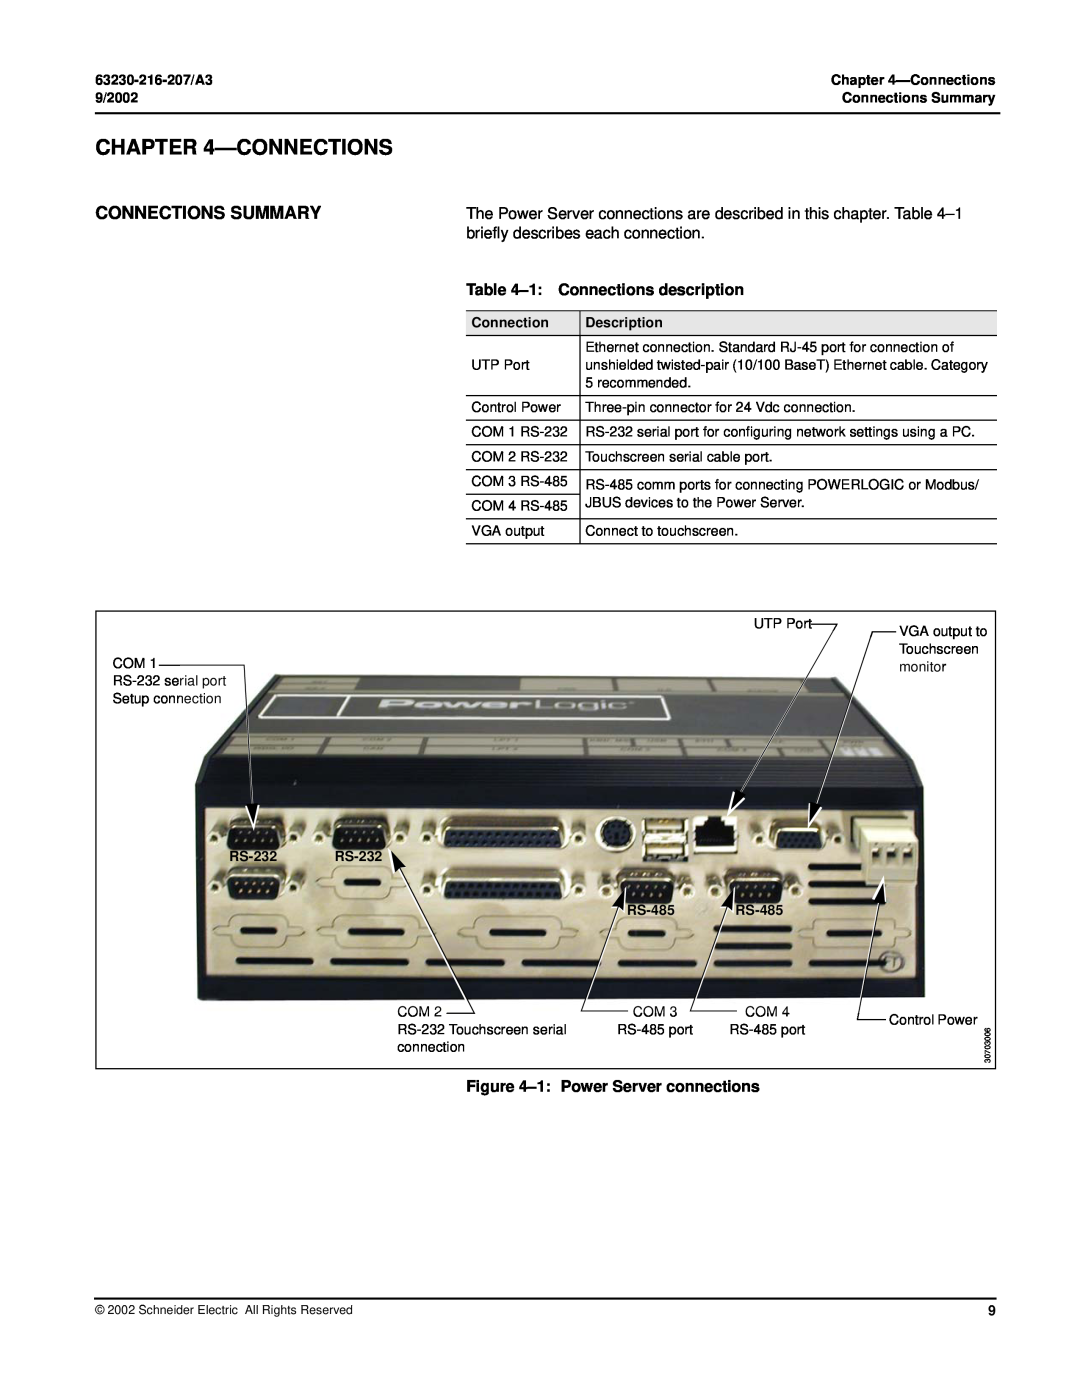 Schneider Electric PWRSRV750 Connections Summary, 1 Connections description, 1 Power Server connections, 9/2002 